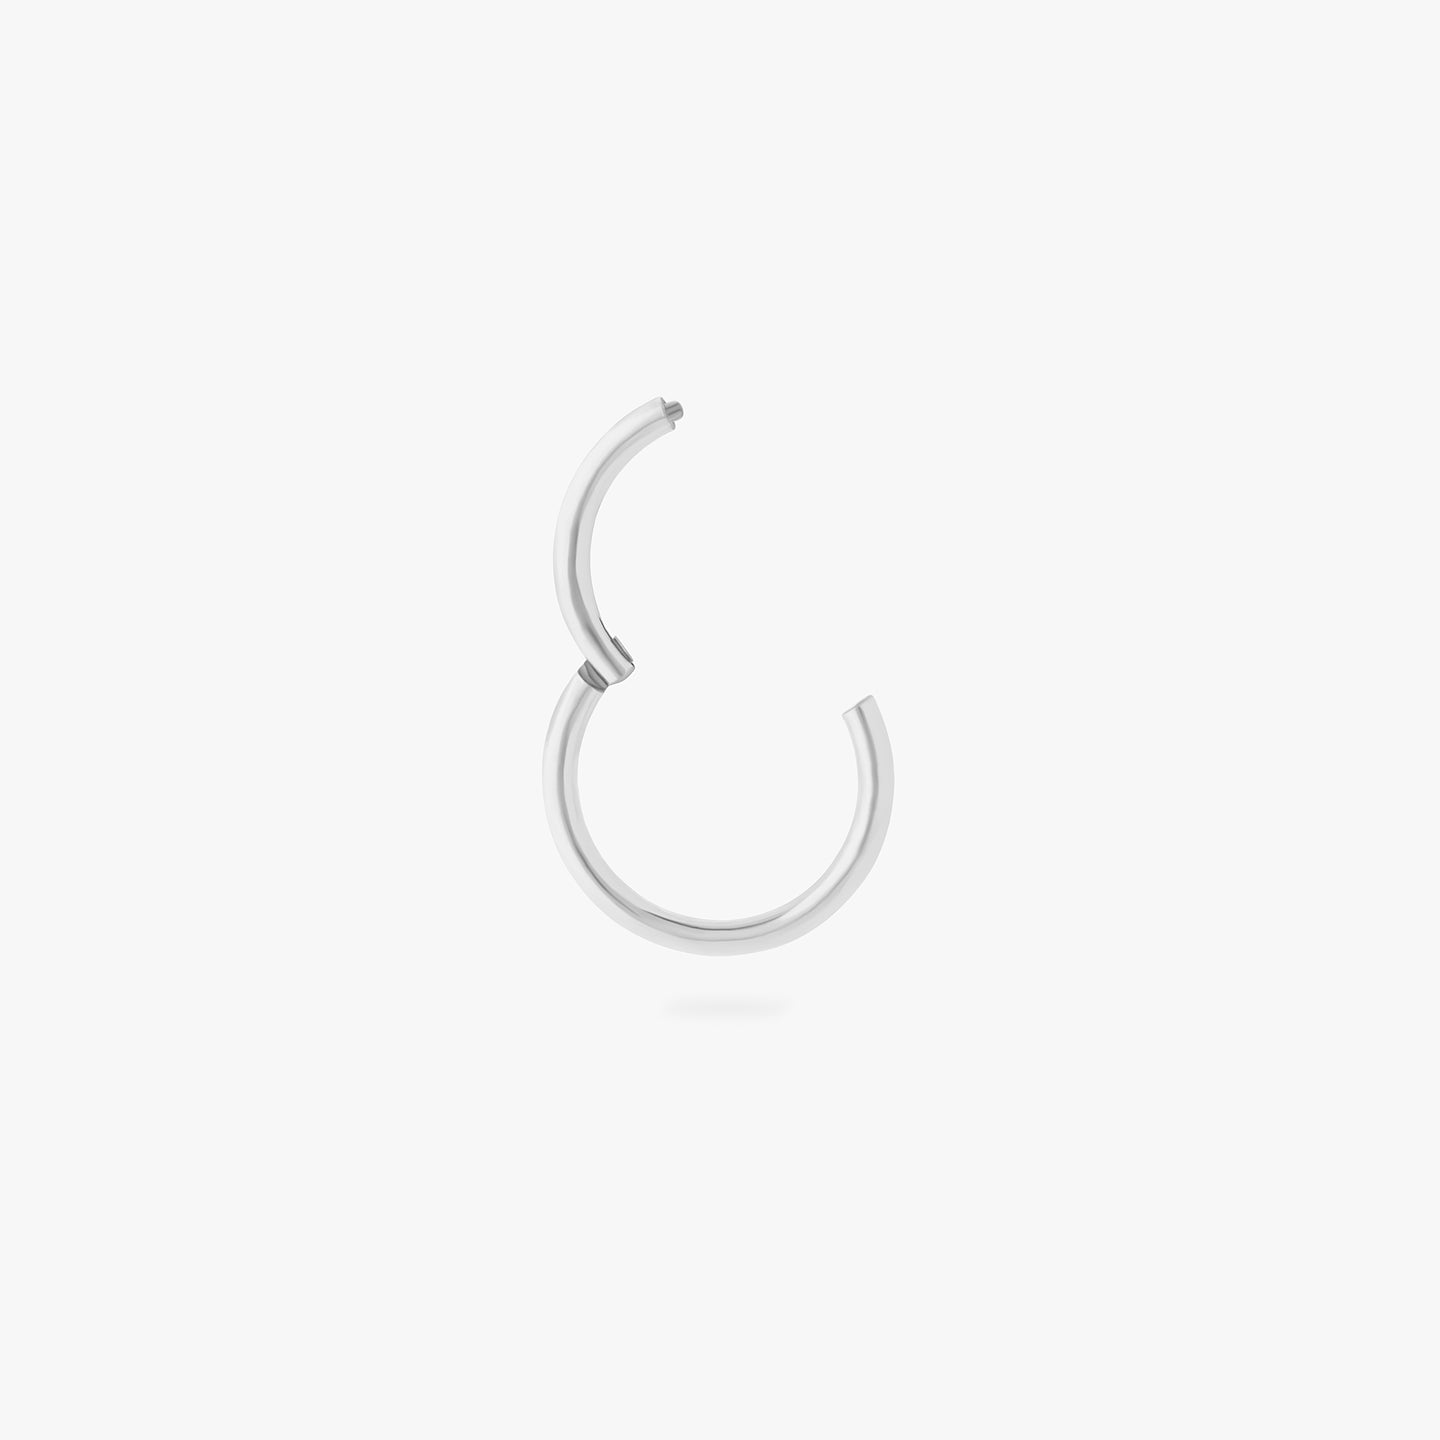 This is an image of a silver clicker with an 8mm inner diameter. color:null|silver